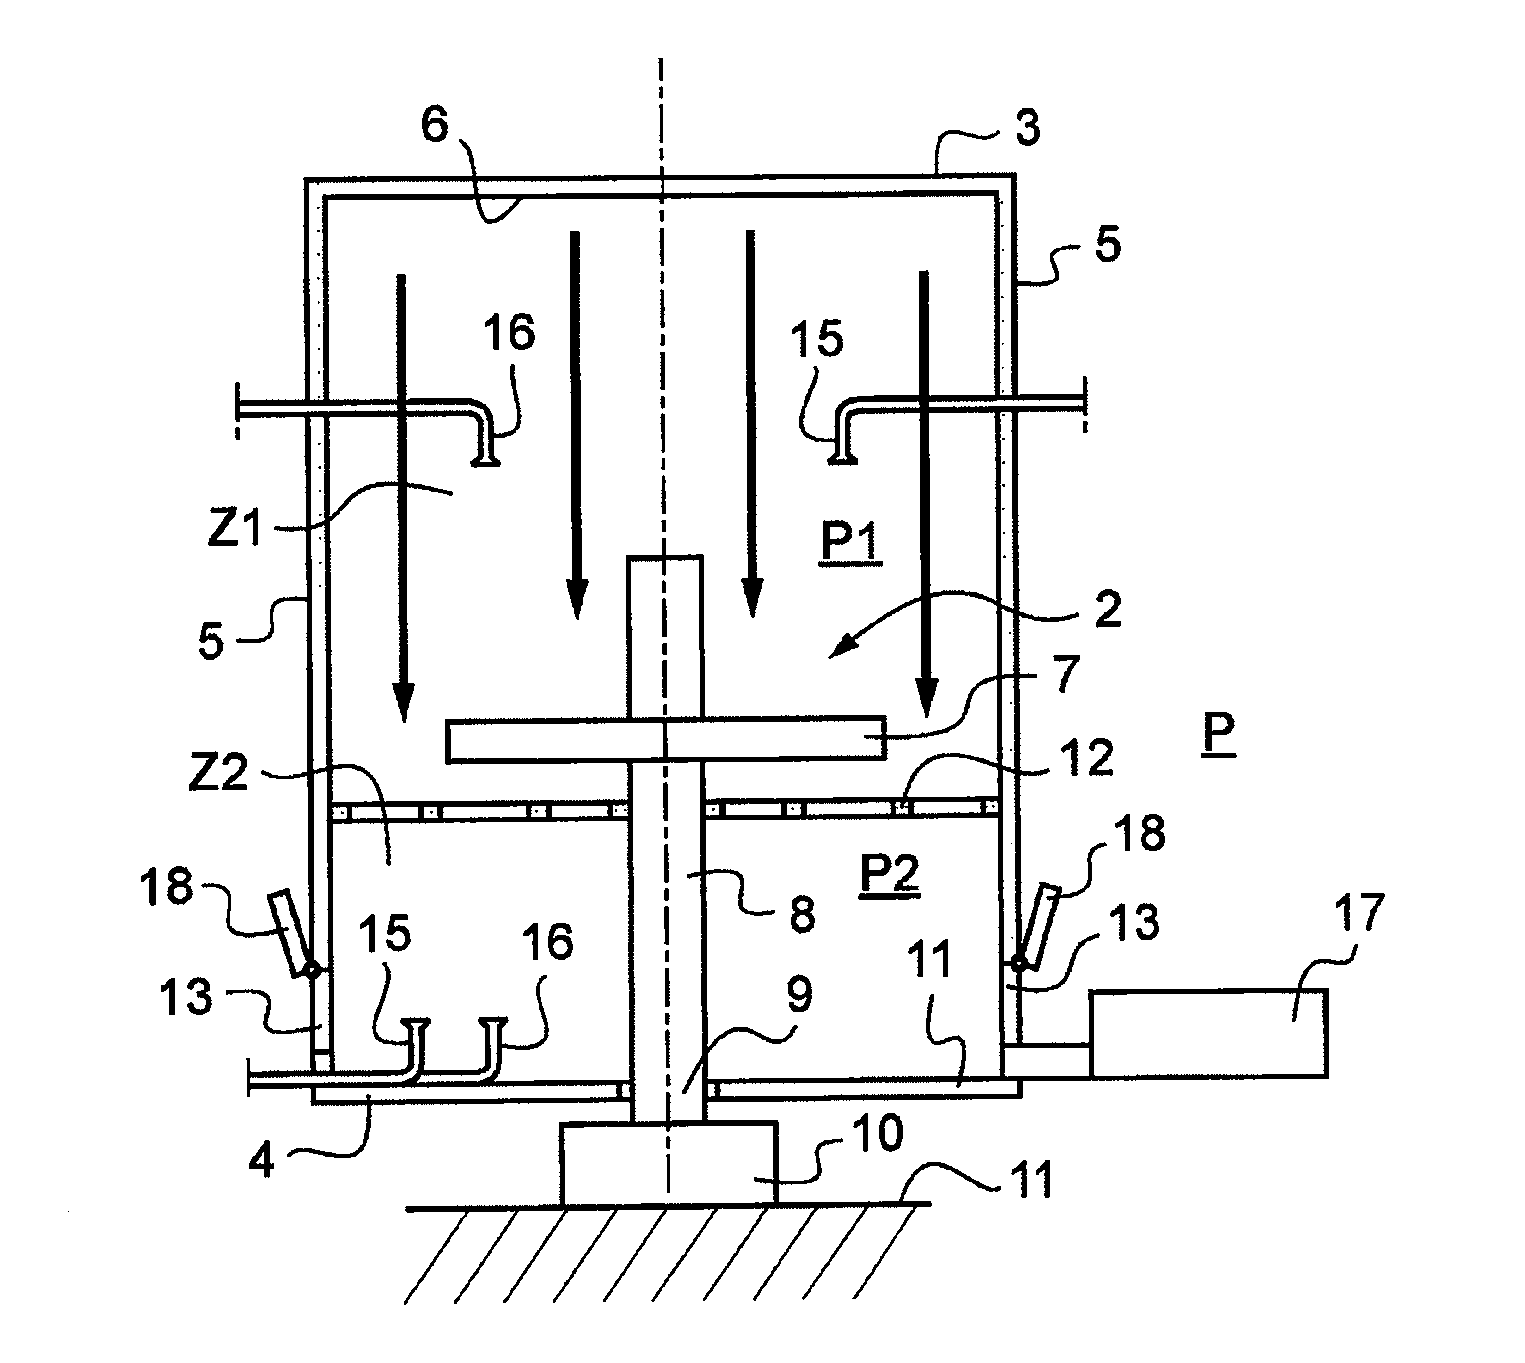 Aseptic packaging installation having aseptic buffer zones